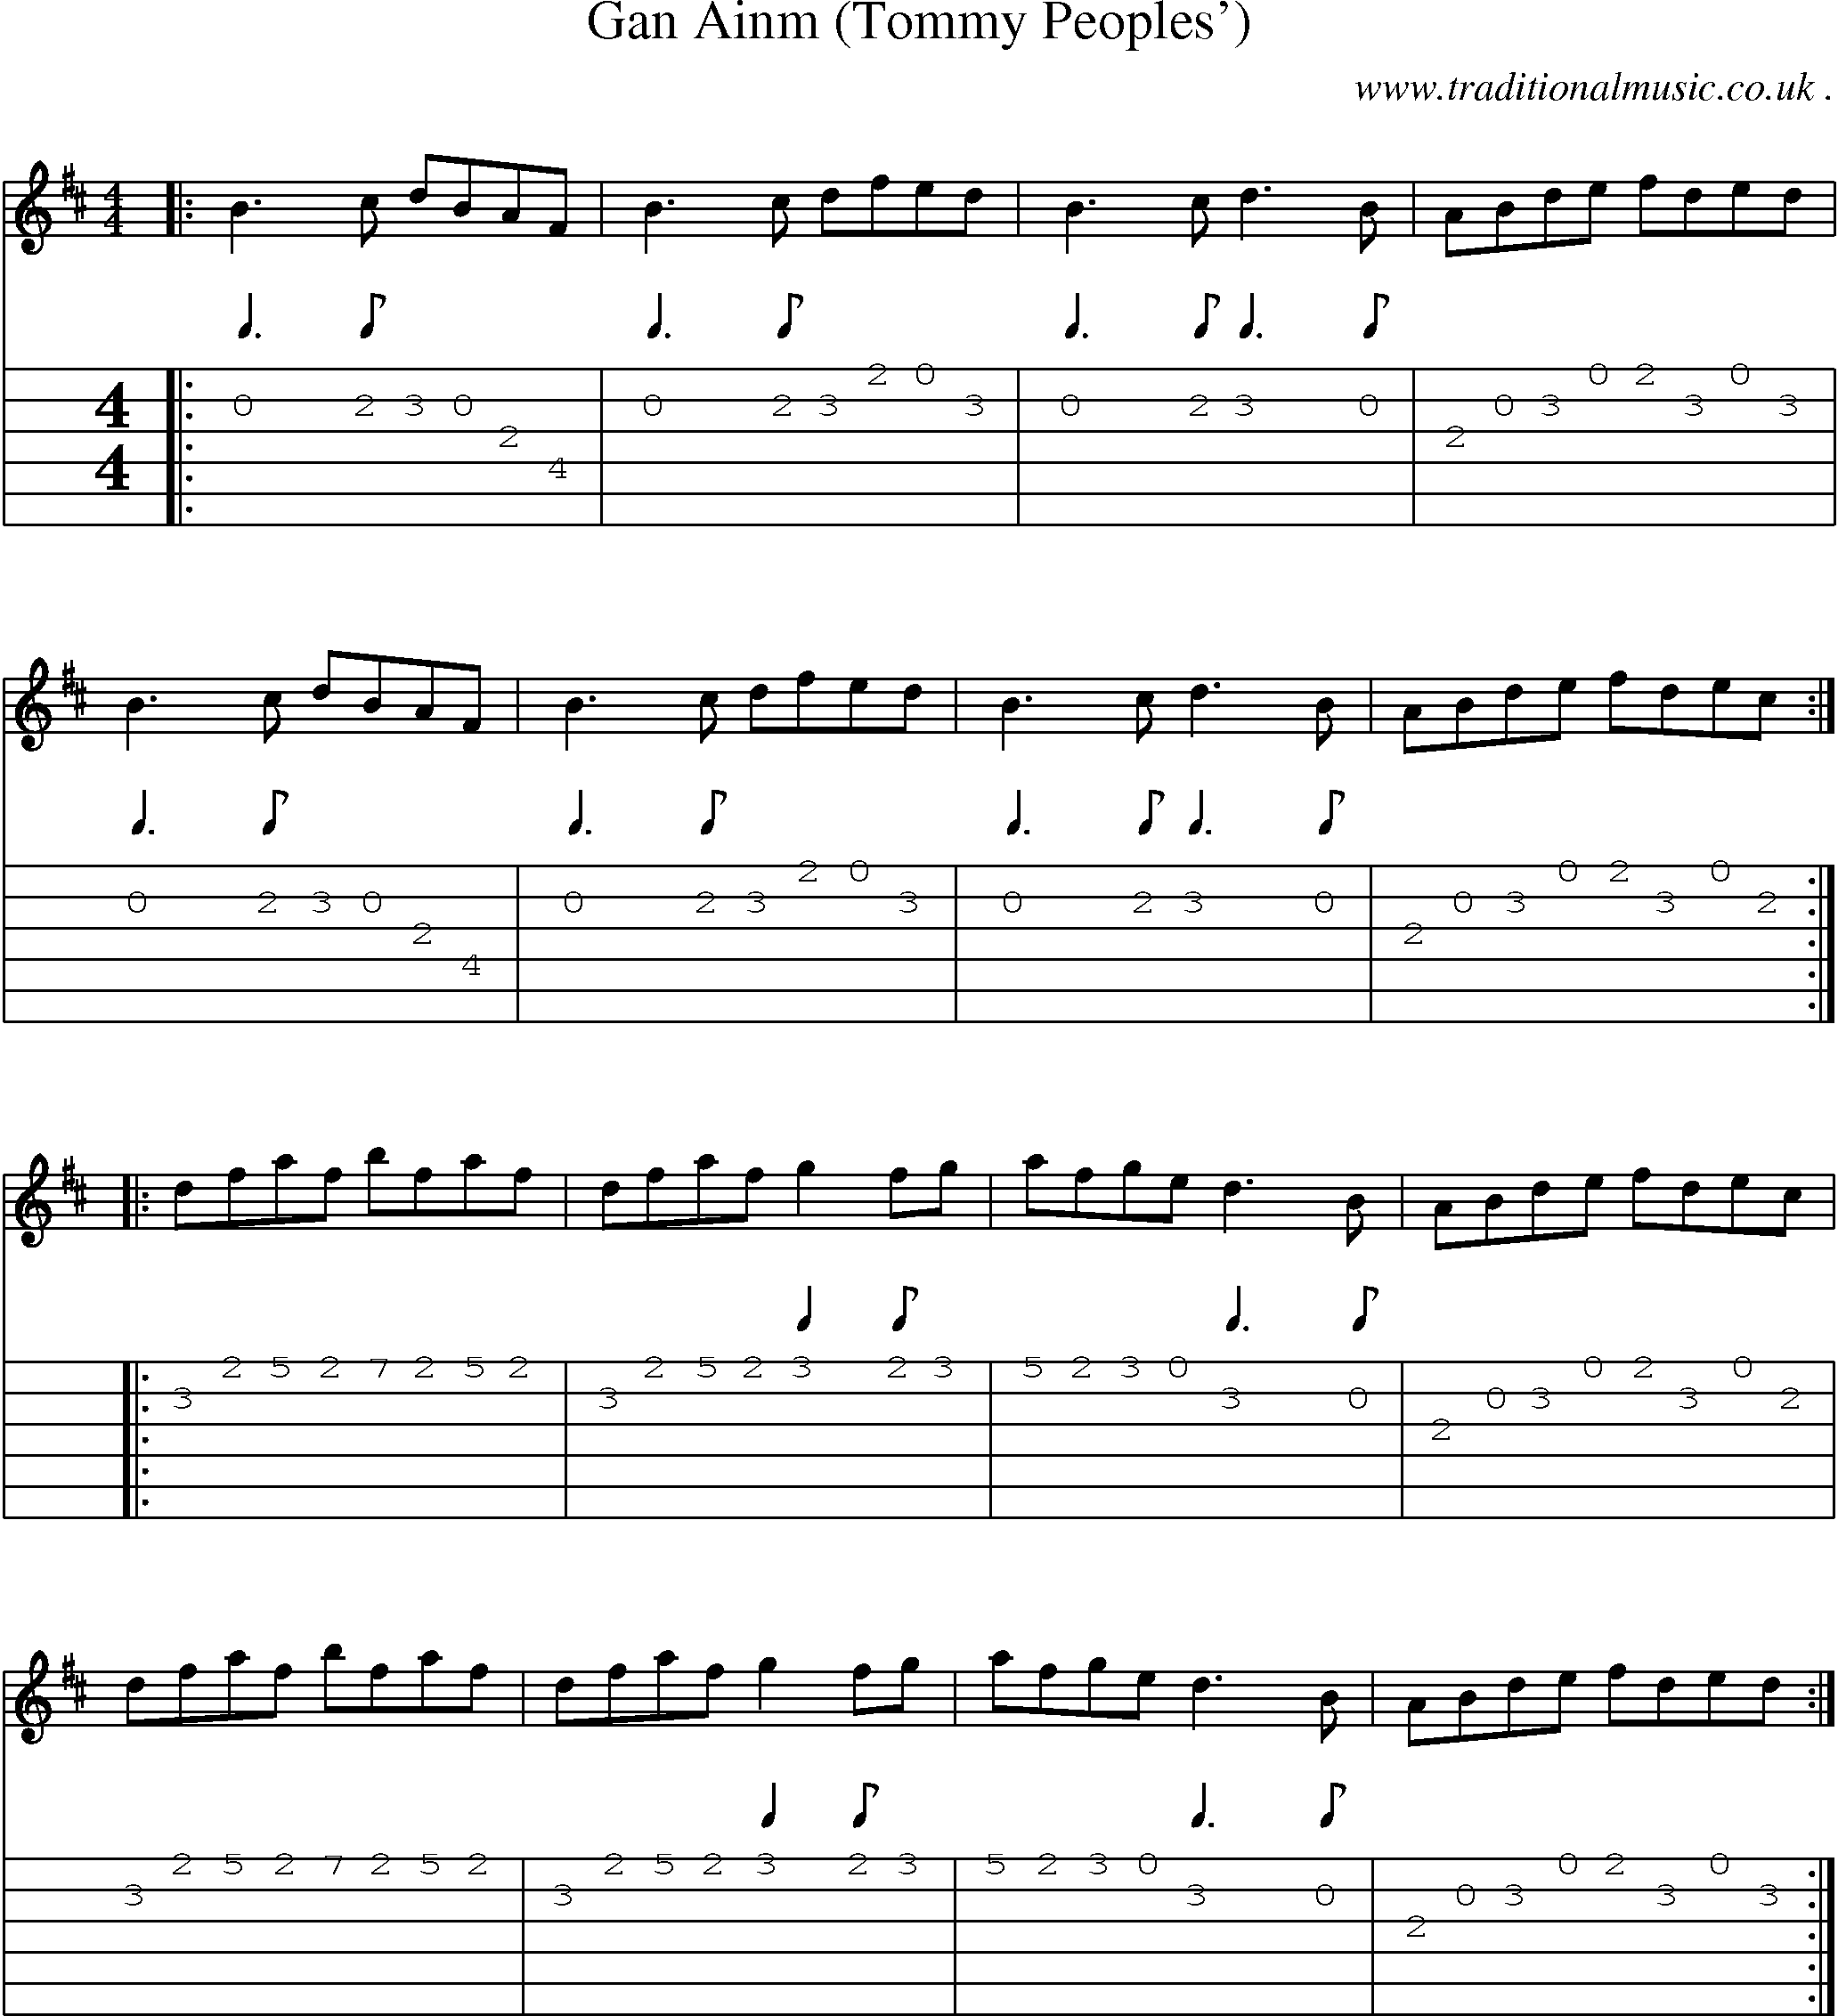 Sheet-Music and Guitar Tabs for Gan Ainm (tommy Peoples)